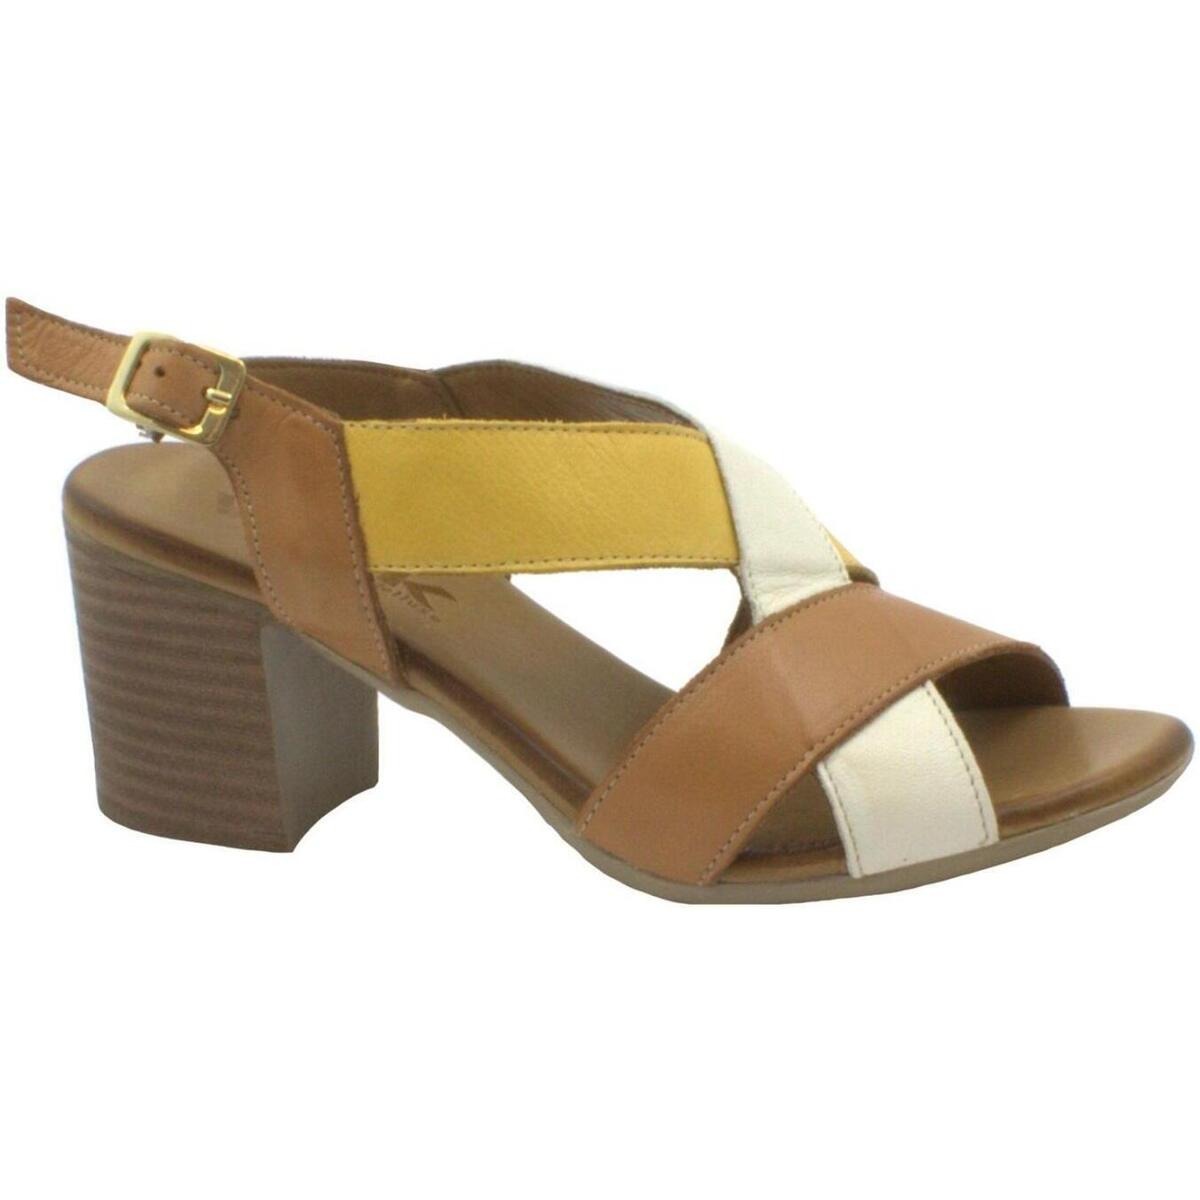 Spartoo Sandals in Brown by Melluso GOOFASH